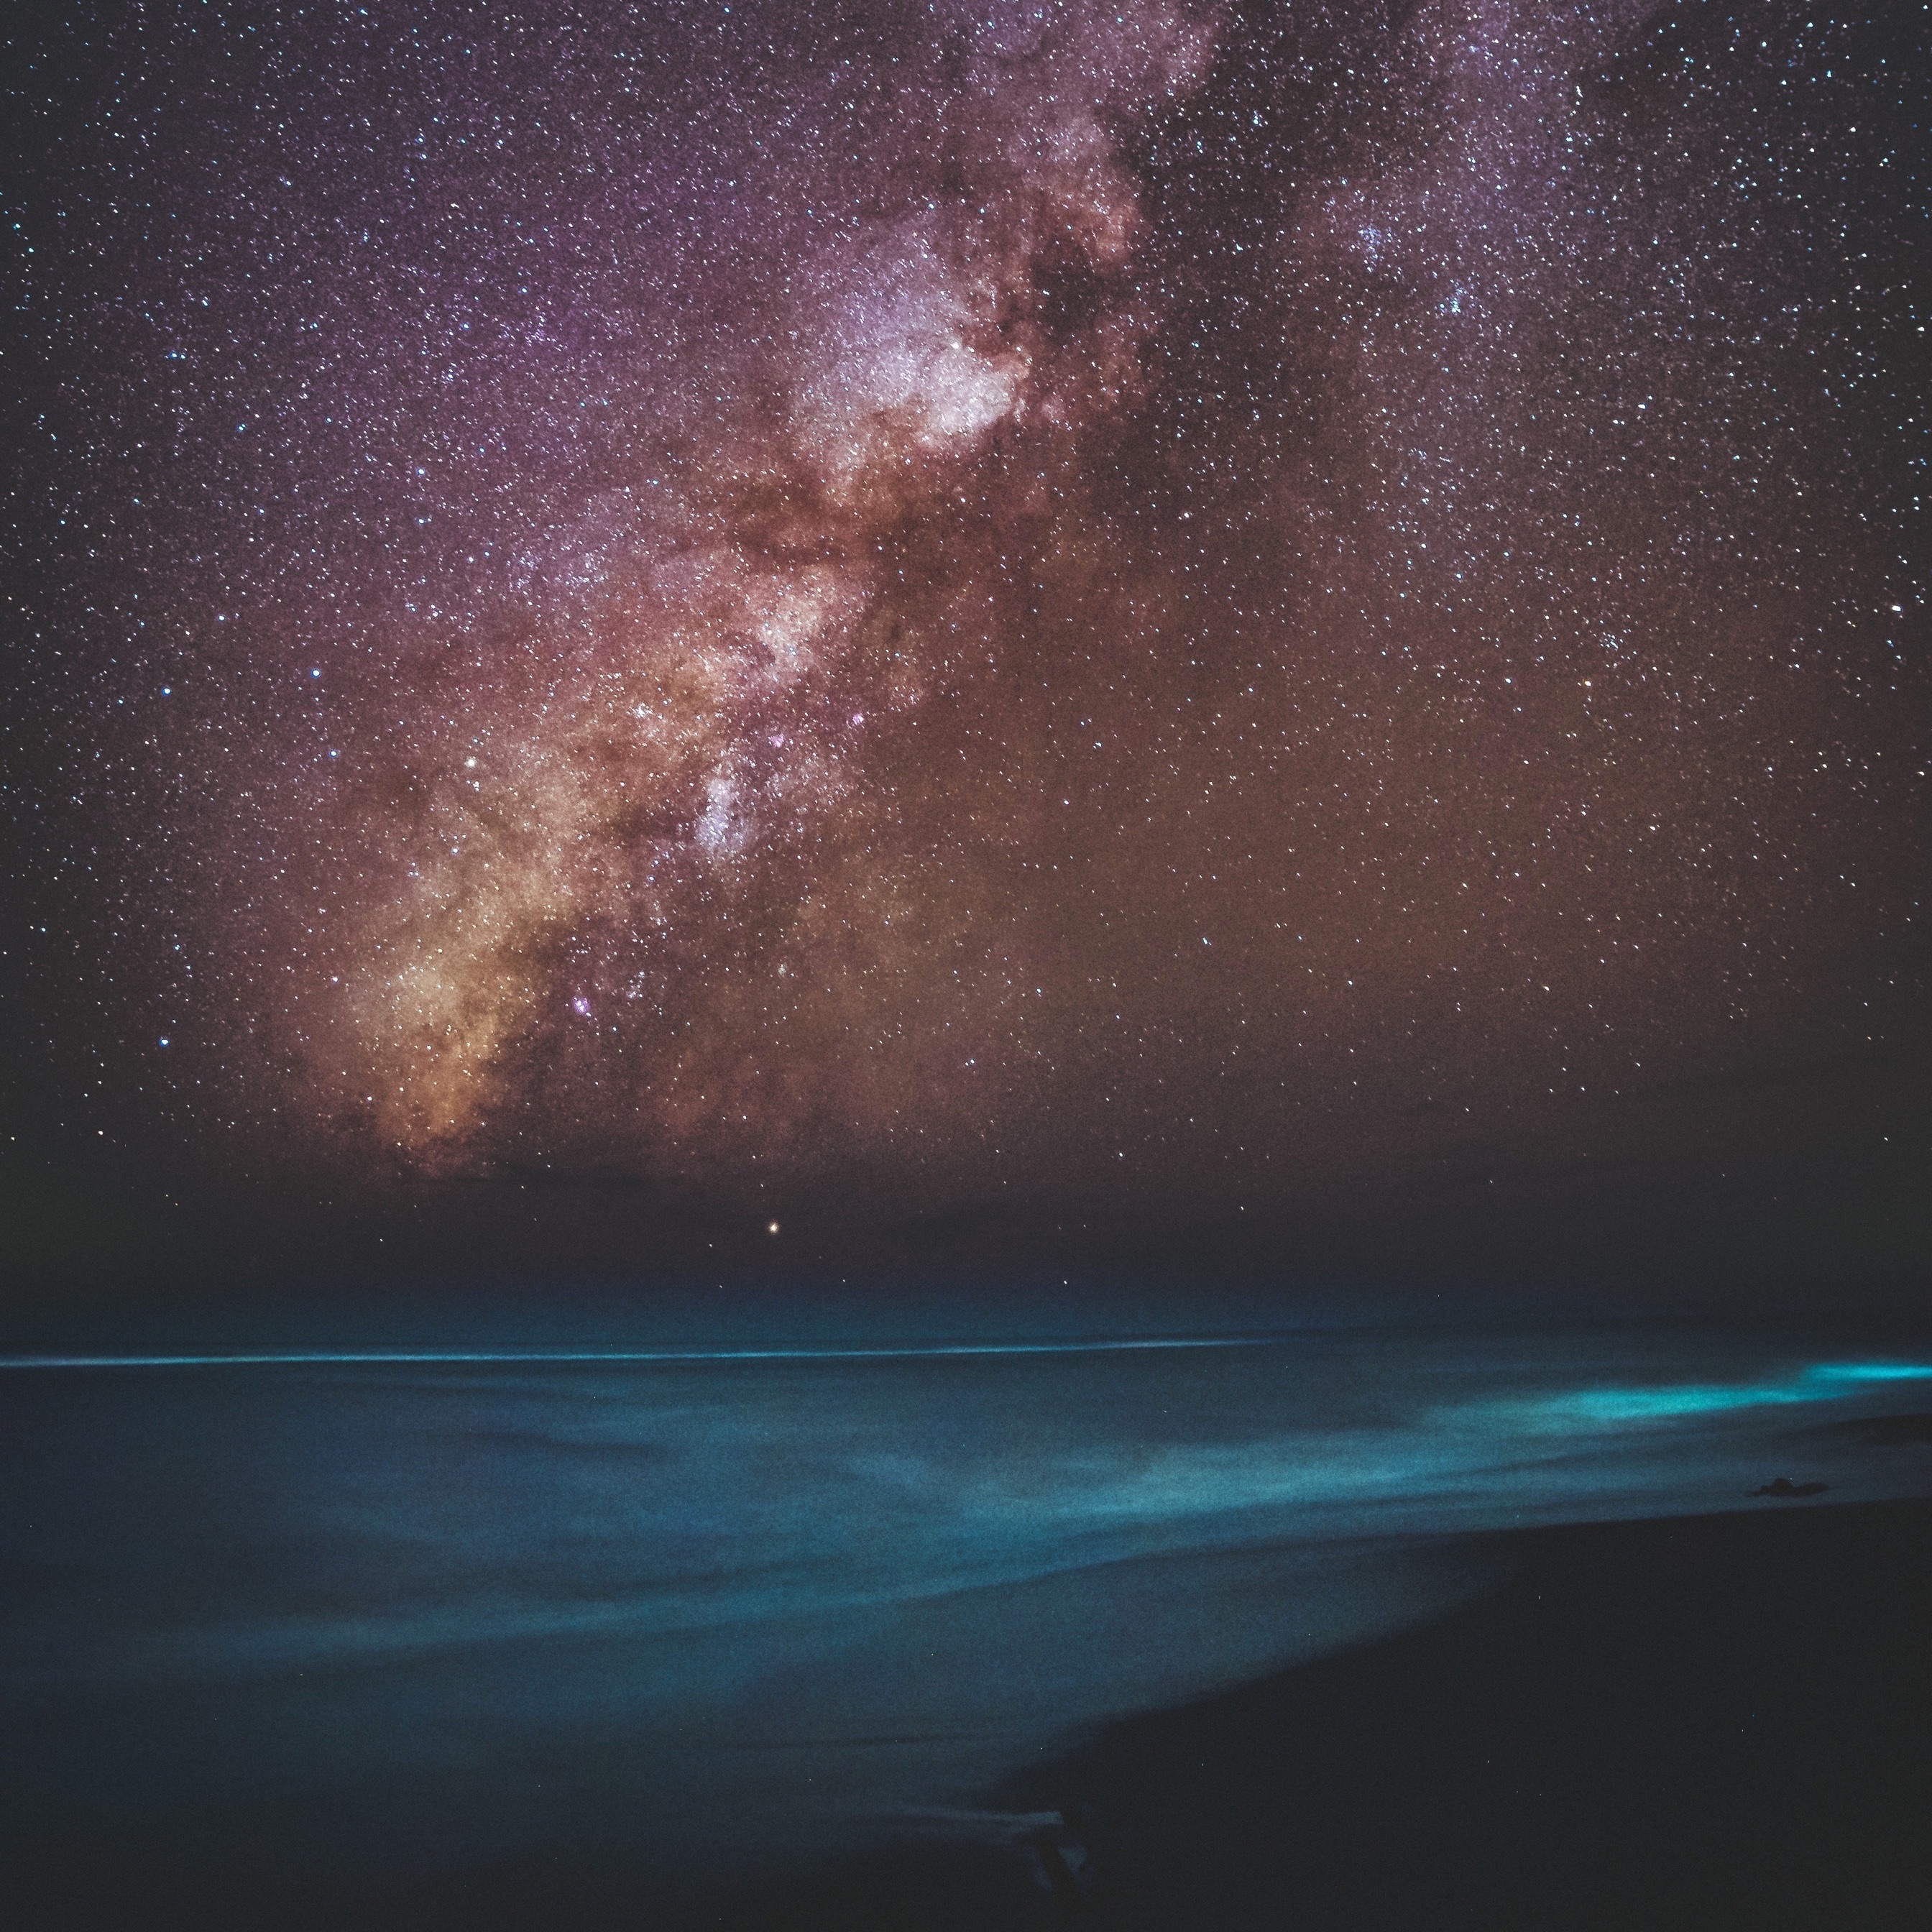 Wallpaper Weekends: Starry Night Wallpapers for iPhone